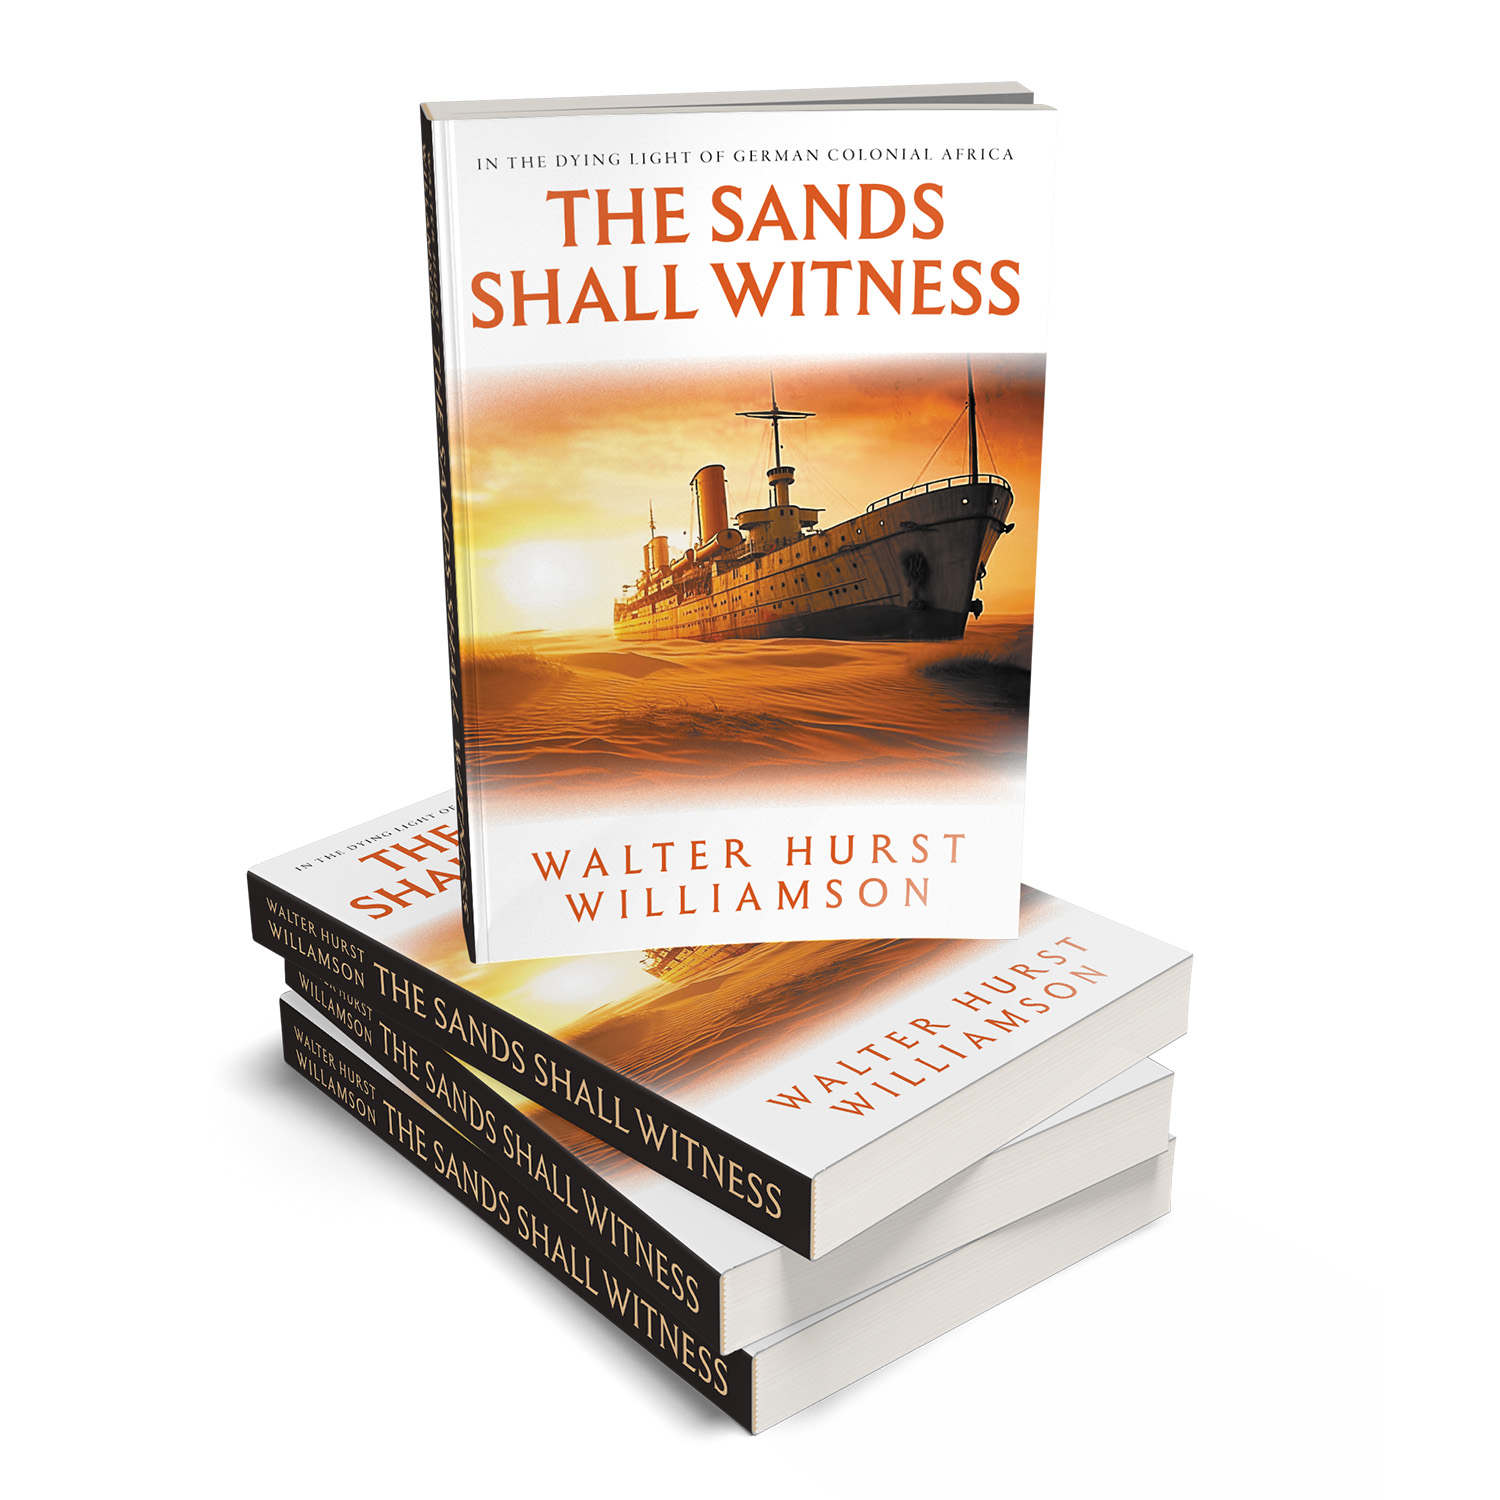 'The Sands Shall Witness' is an epic historical fiction novel, set in the darkness of German Colonial rule of early 20th Century Africa. The author is Walter Hurst Williamson. The book cover, maps and interior formatting are designed by Mark Thomas of coverness.com. To find out more about my book design services, please visit www.coverness.com